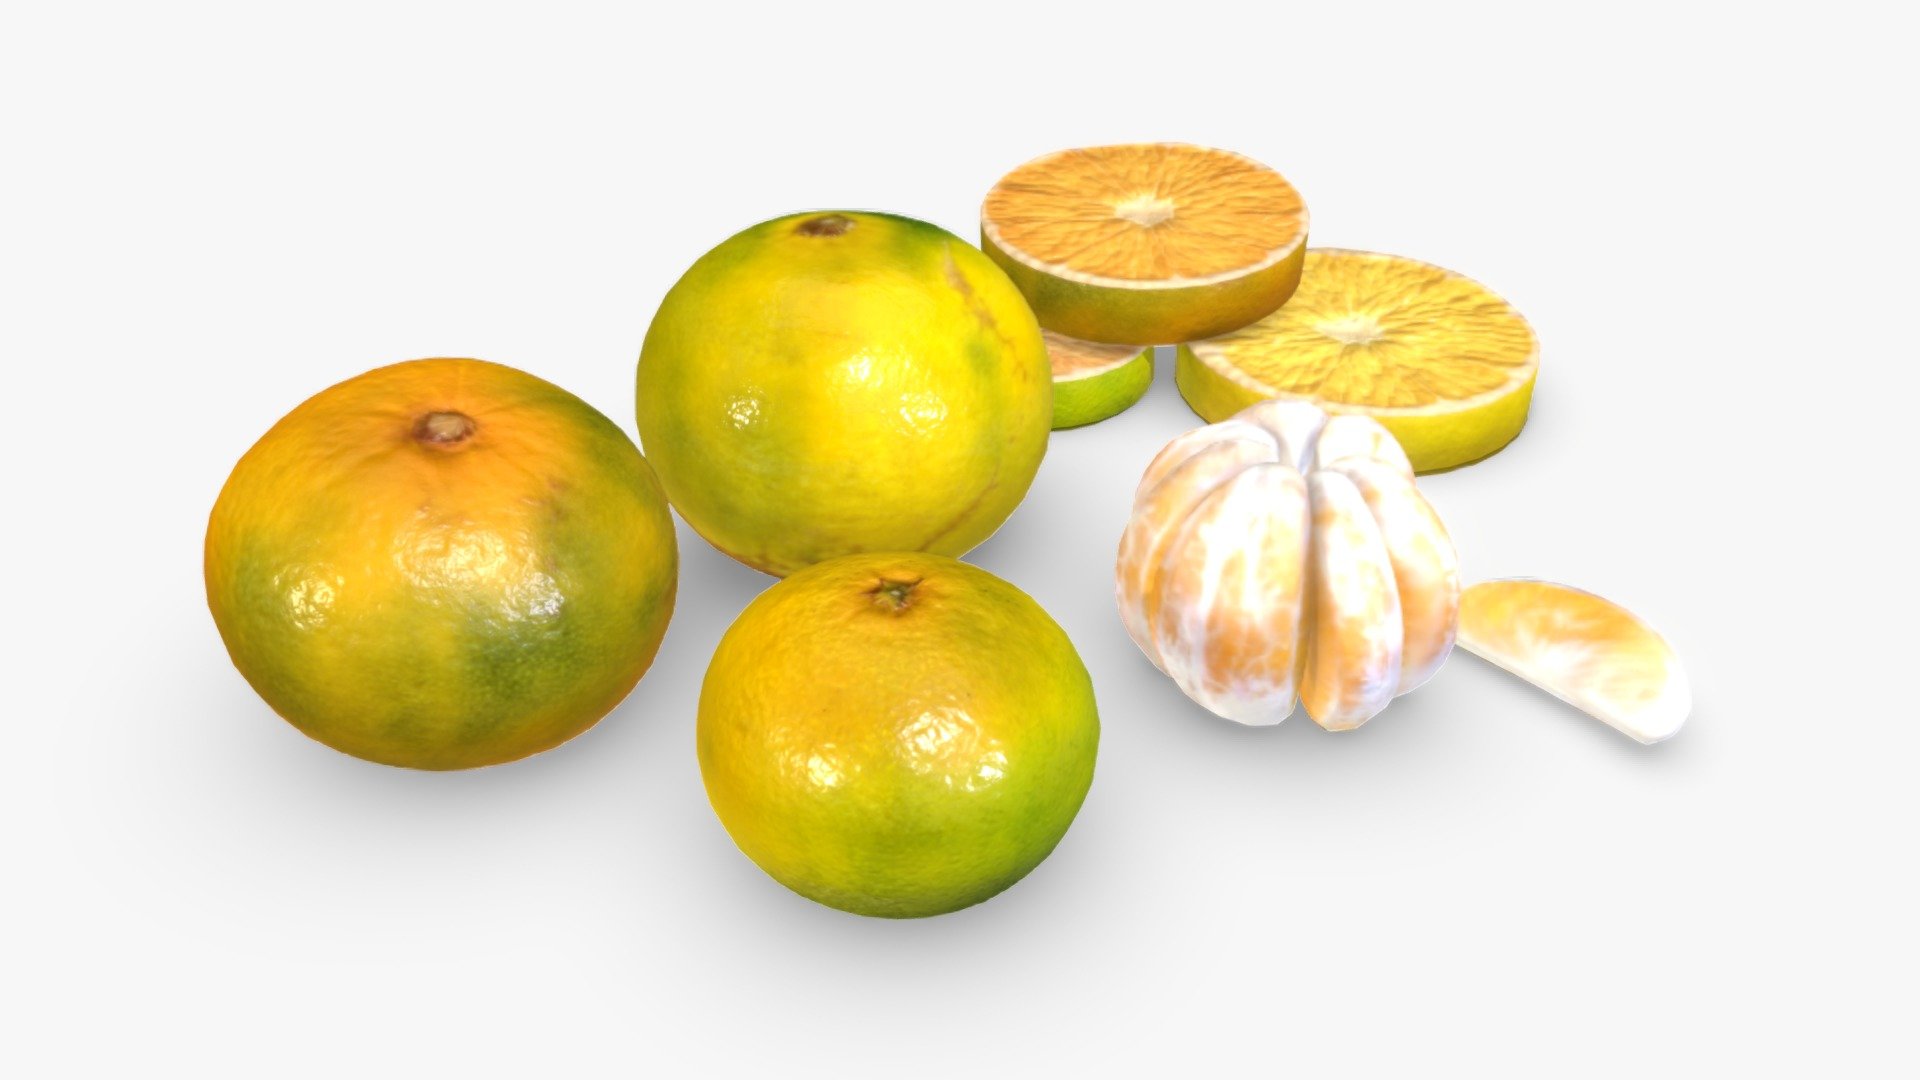 Check out my website for more products and better deals! &amp;gt;&amp;gt; SM5 by Heledahn &amp;lt;&amp;lt;


This is a digital 3d model of three green mikan fruits, scanned and retopologized from real Japanese citrus. The resulting models have an excellent quality and detail, while maintaining a very small poly count.

The product includes segments and slices also scanned, textured, and clean of topology.

The textures are interchangeable, allowing for a great number of variations!

**PLEASE NOTE: ** This model is subdivided for aesthetic purposes. The mesh can be safely unsubdiveded for a lower poly-count.

(TIF DISPLACEMENT MAP TEXTURES ONLY FOR SALE IN MY WEBSITE 🔼)

This product will achieve realistic results in your rendering projects and animations, being greatly suited for close-ups due to their high quality topology and PBR shading 3d model